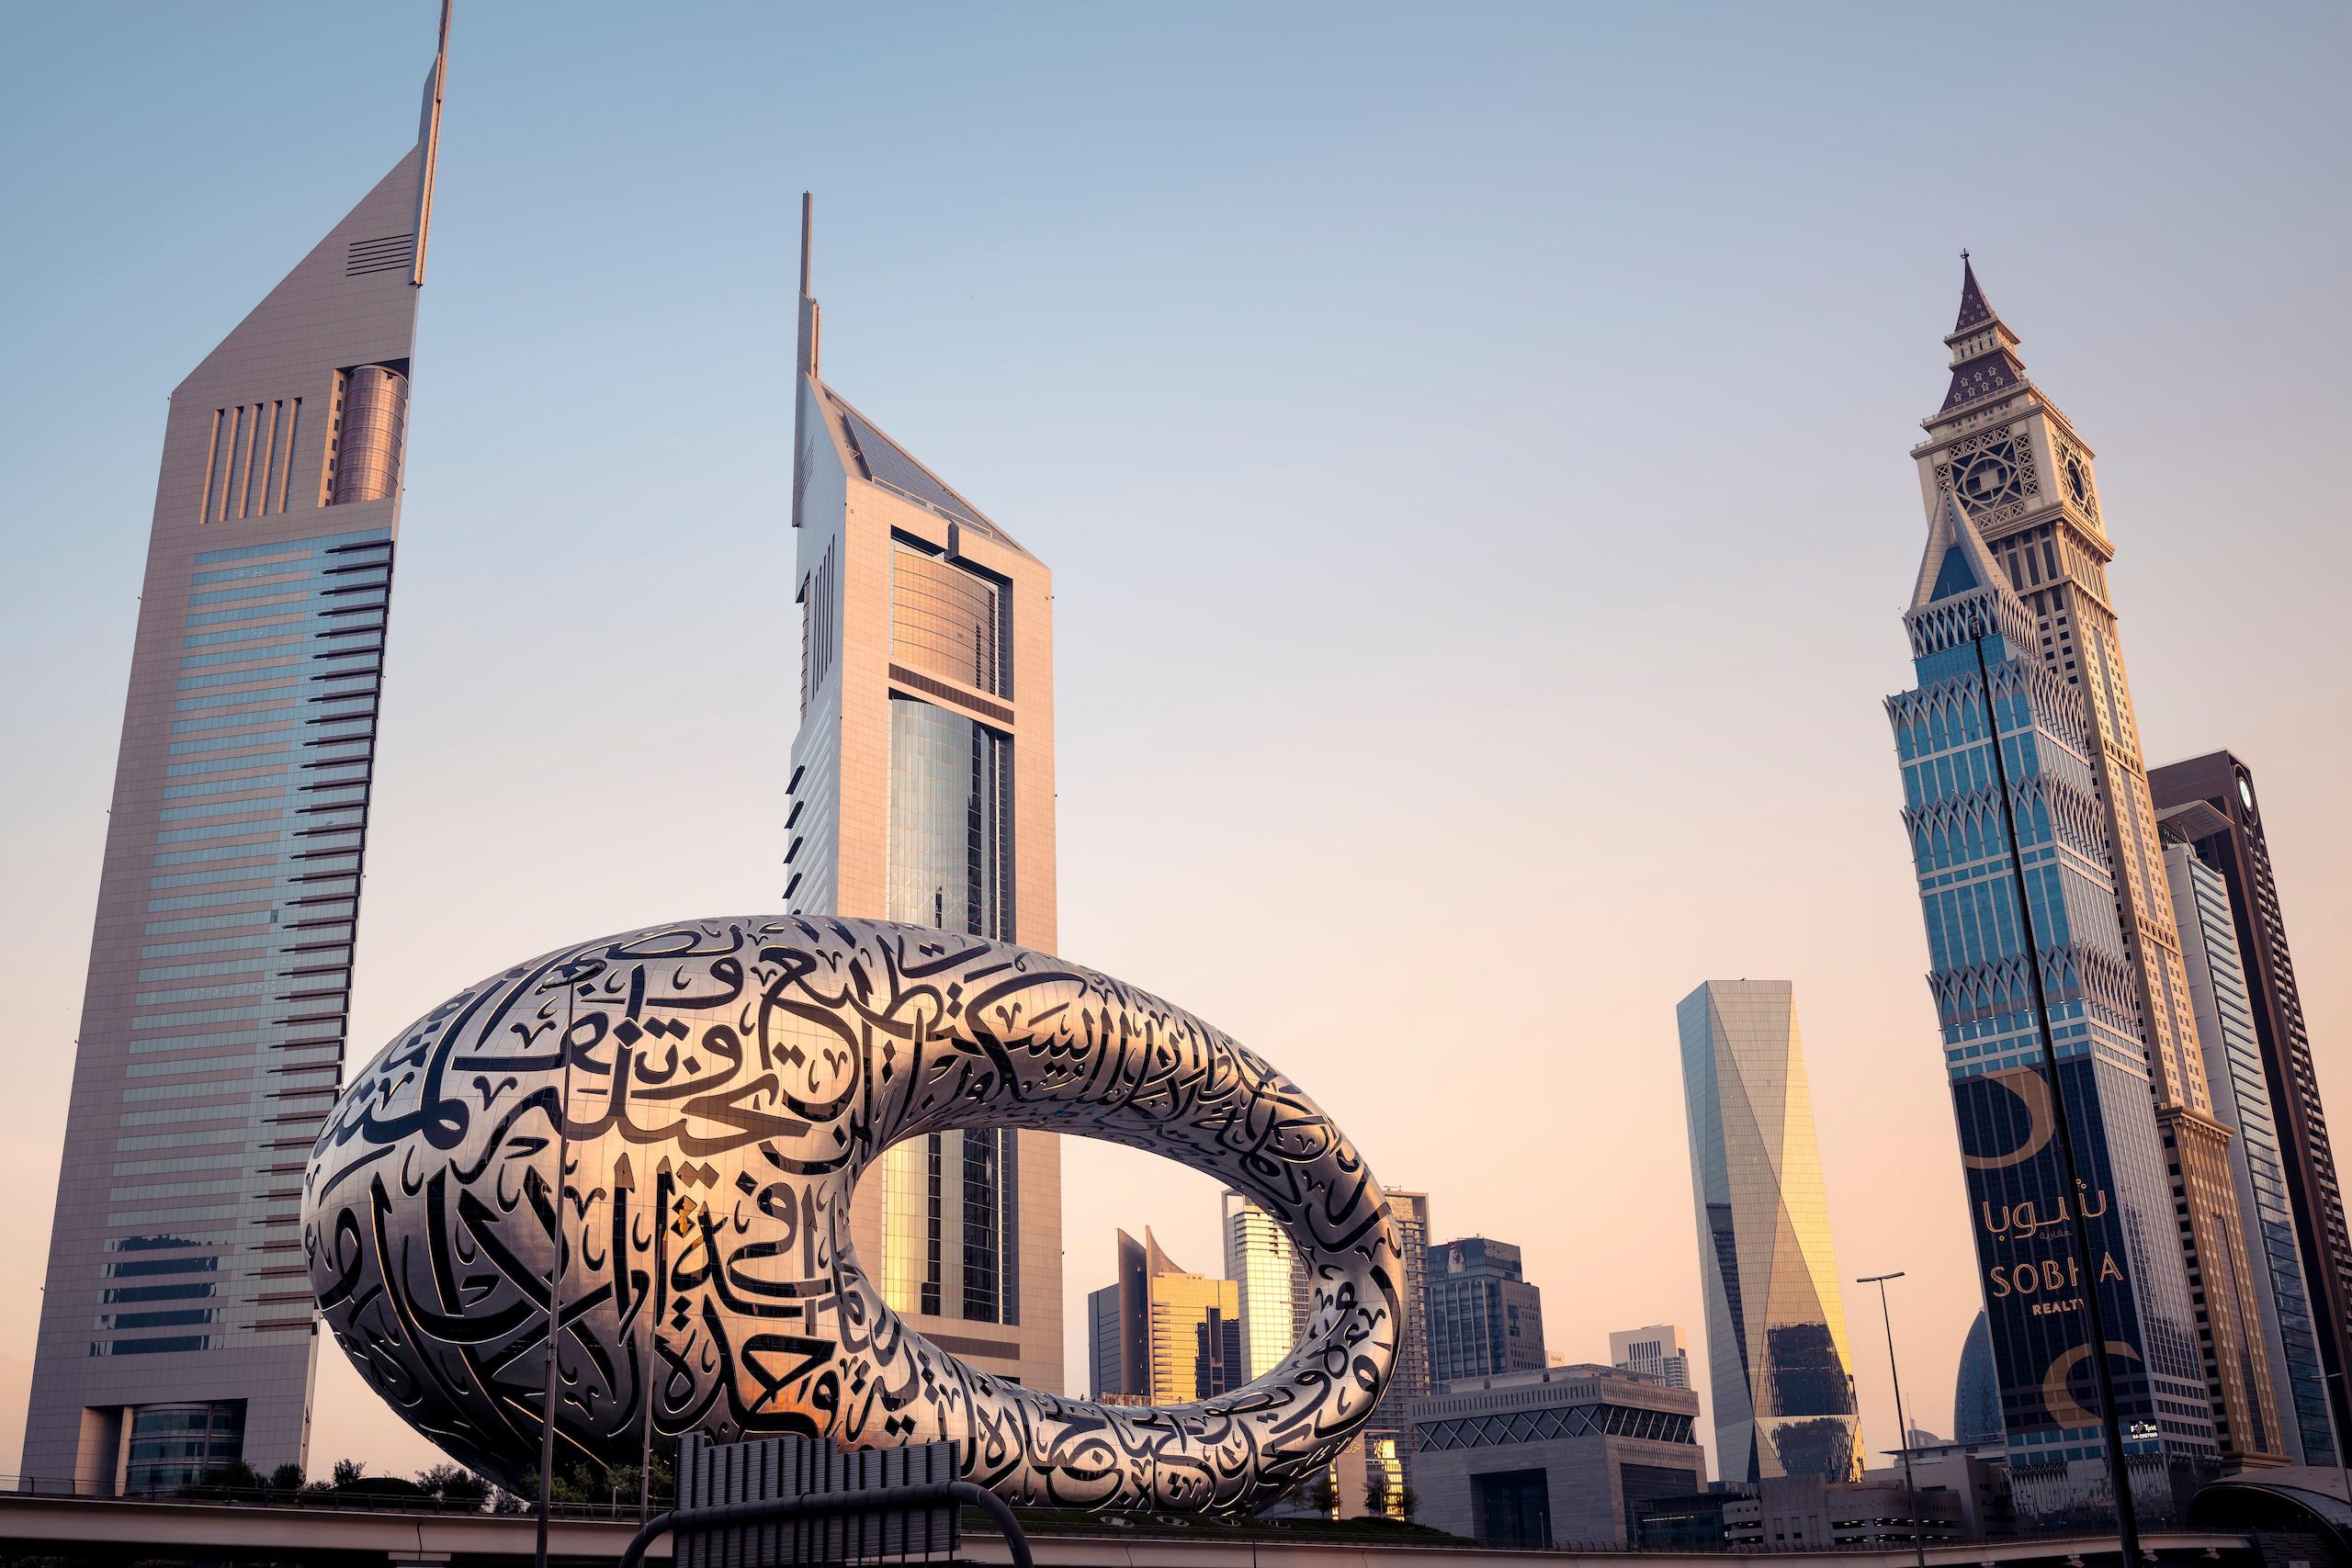 <p>Dubai, United Arab Emirates (UAE),  site of the COP28 conference at the end of the month, where government representatives from all UN countries will discuss global efforts to limit climate change and adapt to its effects (Image: Frank Peters / Alamy)</p>